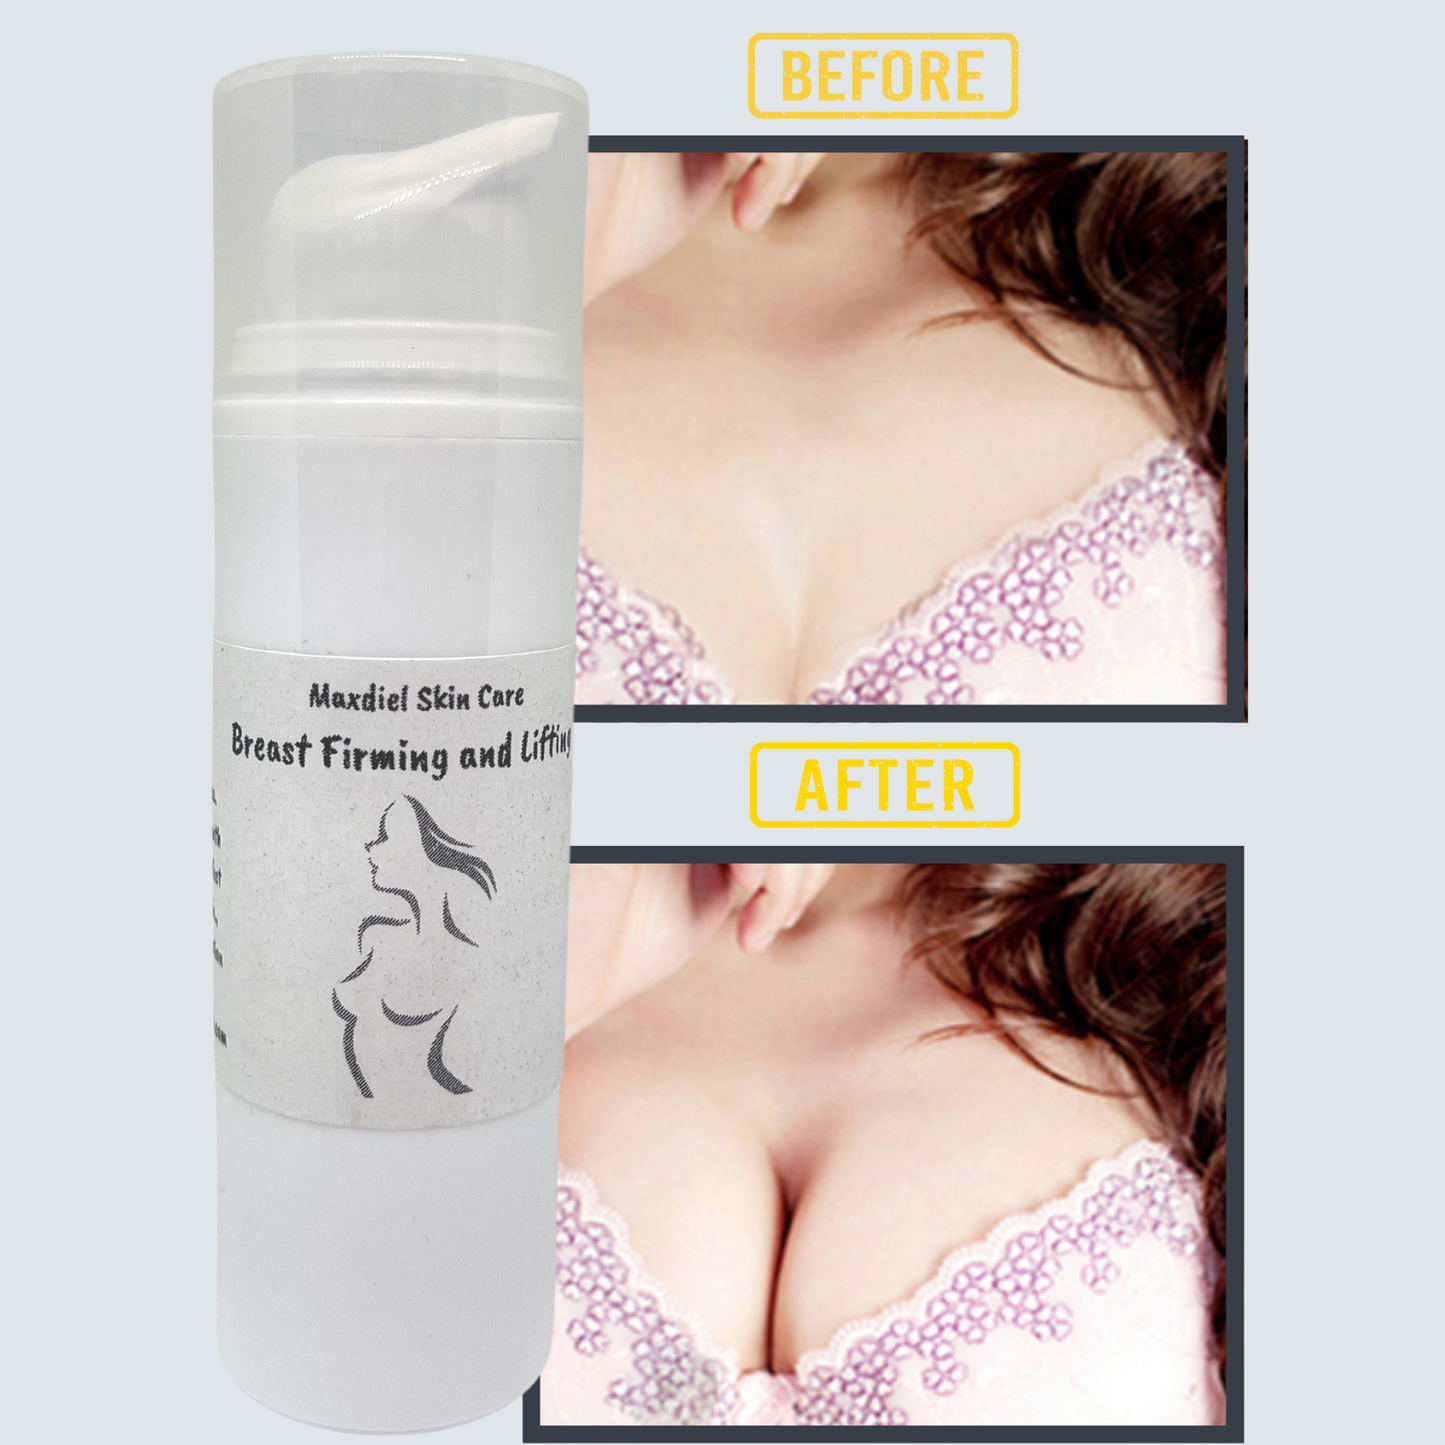 Breast Firming and Lifting Gel 2oz